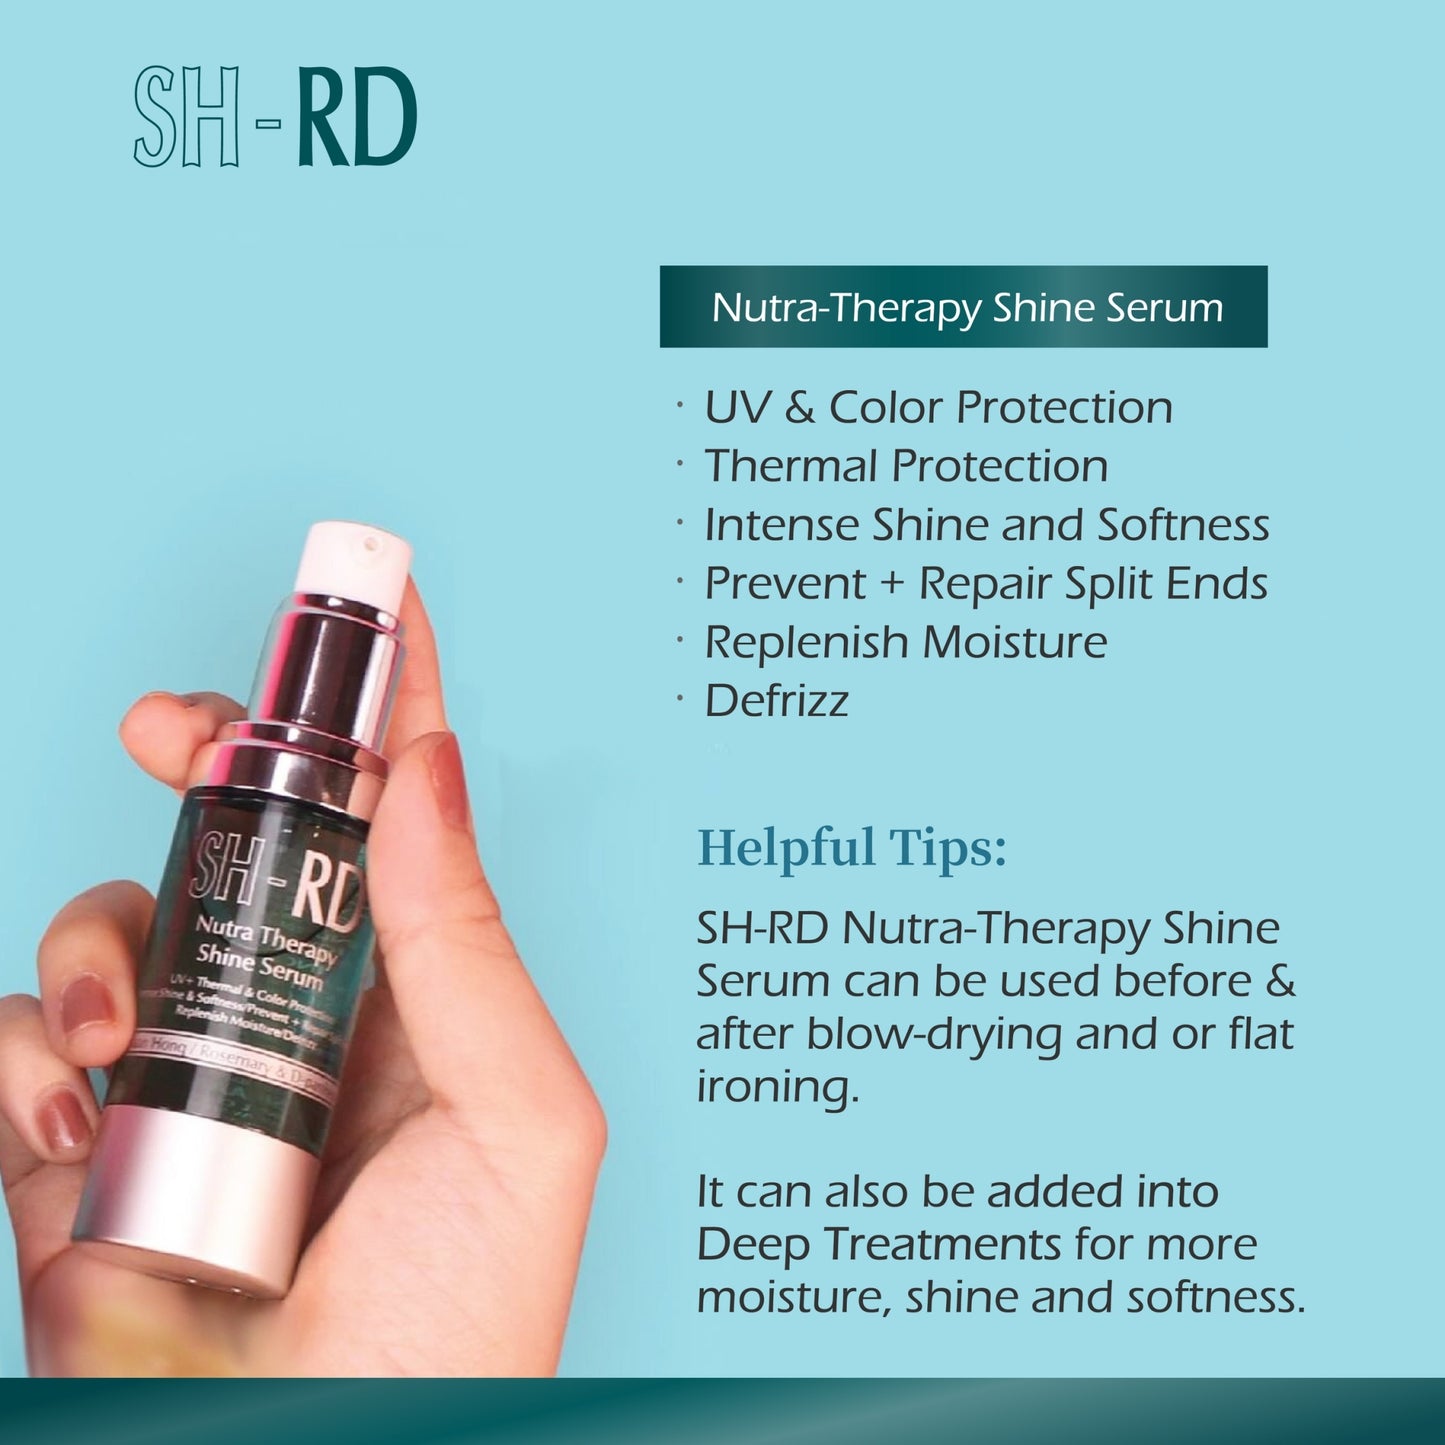 SH-RD Nutra-Therapy Shine Serum